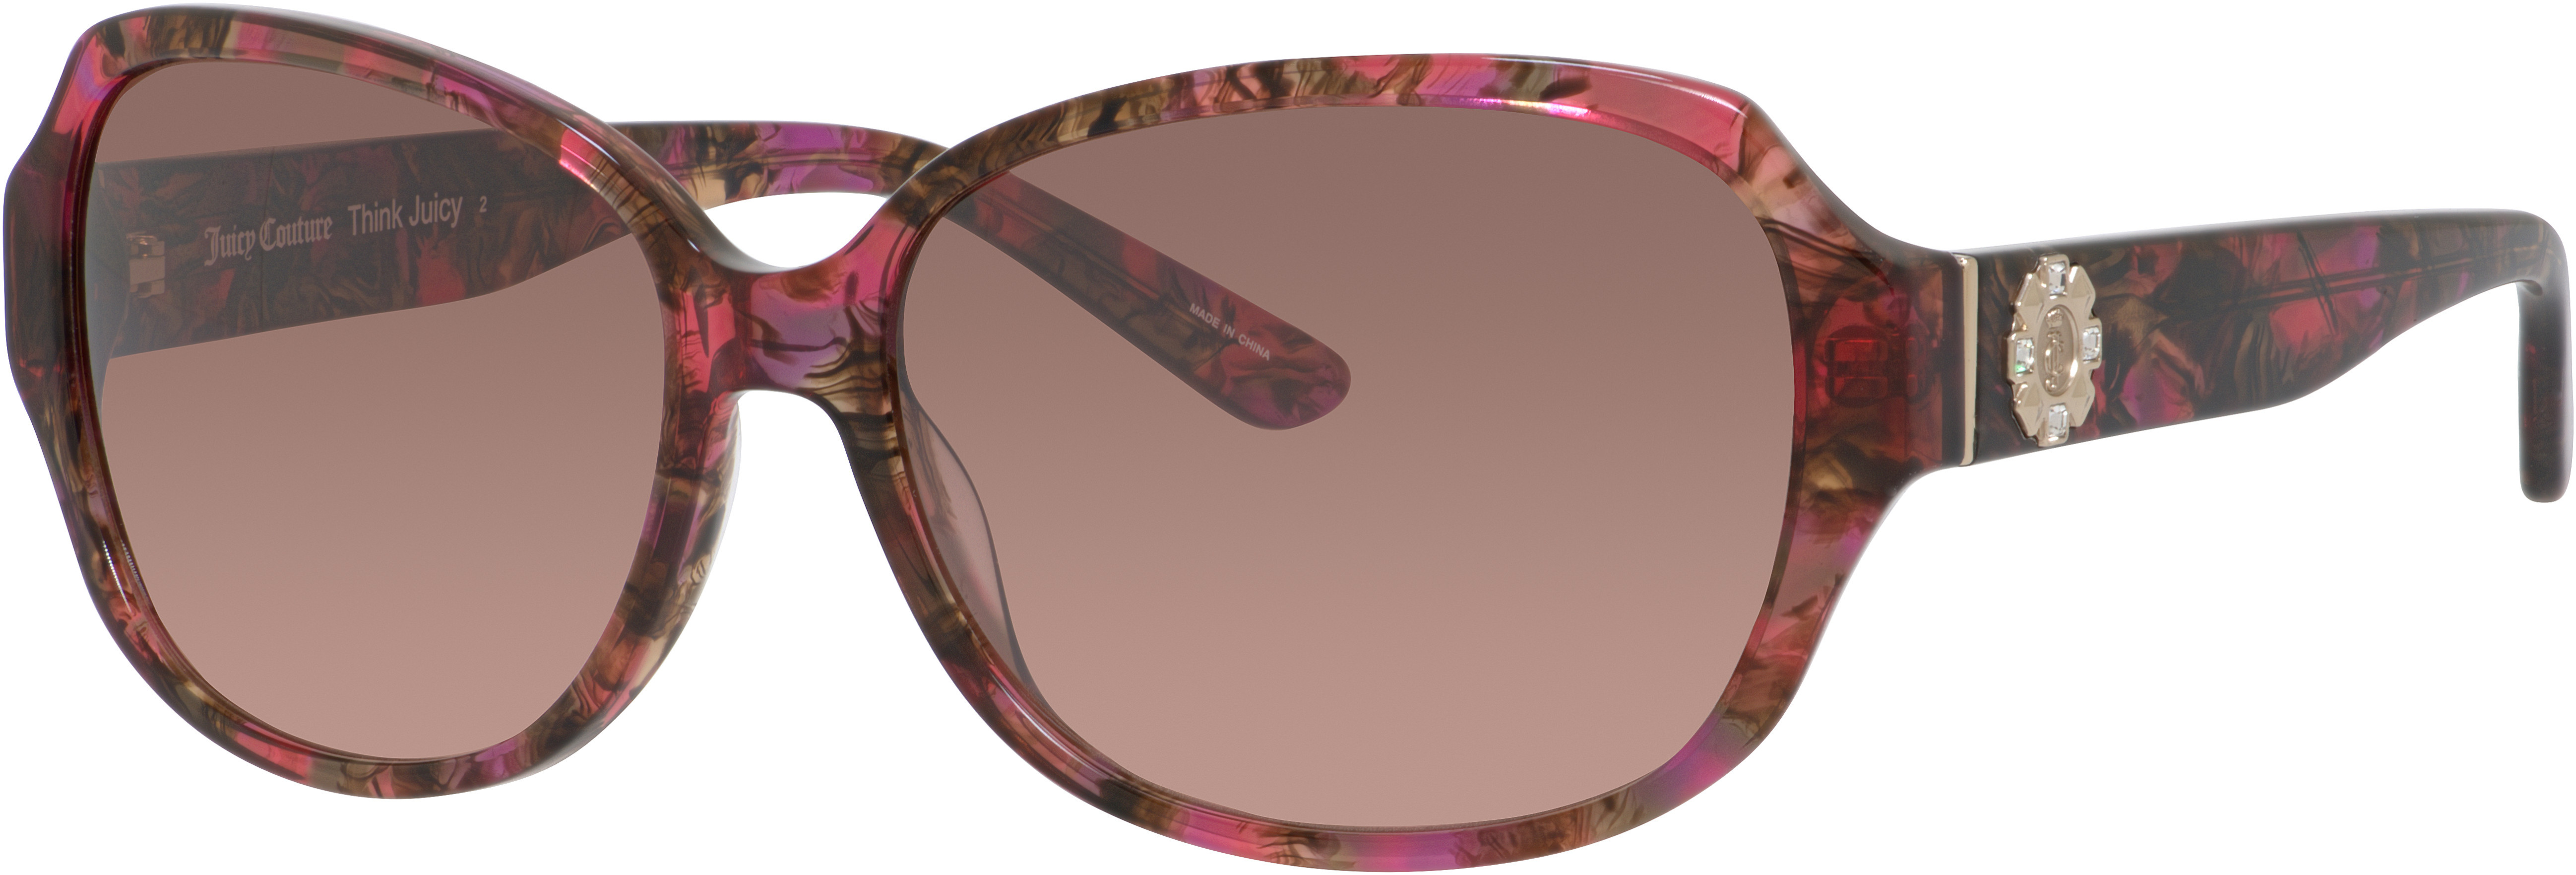 JUICY COUTURE 591